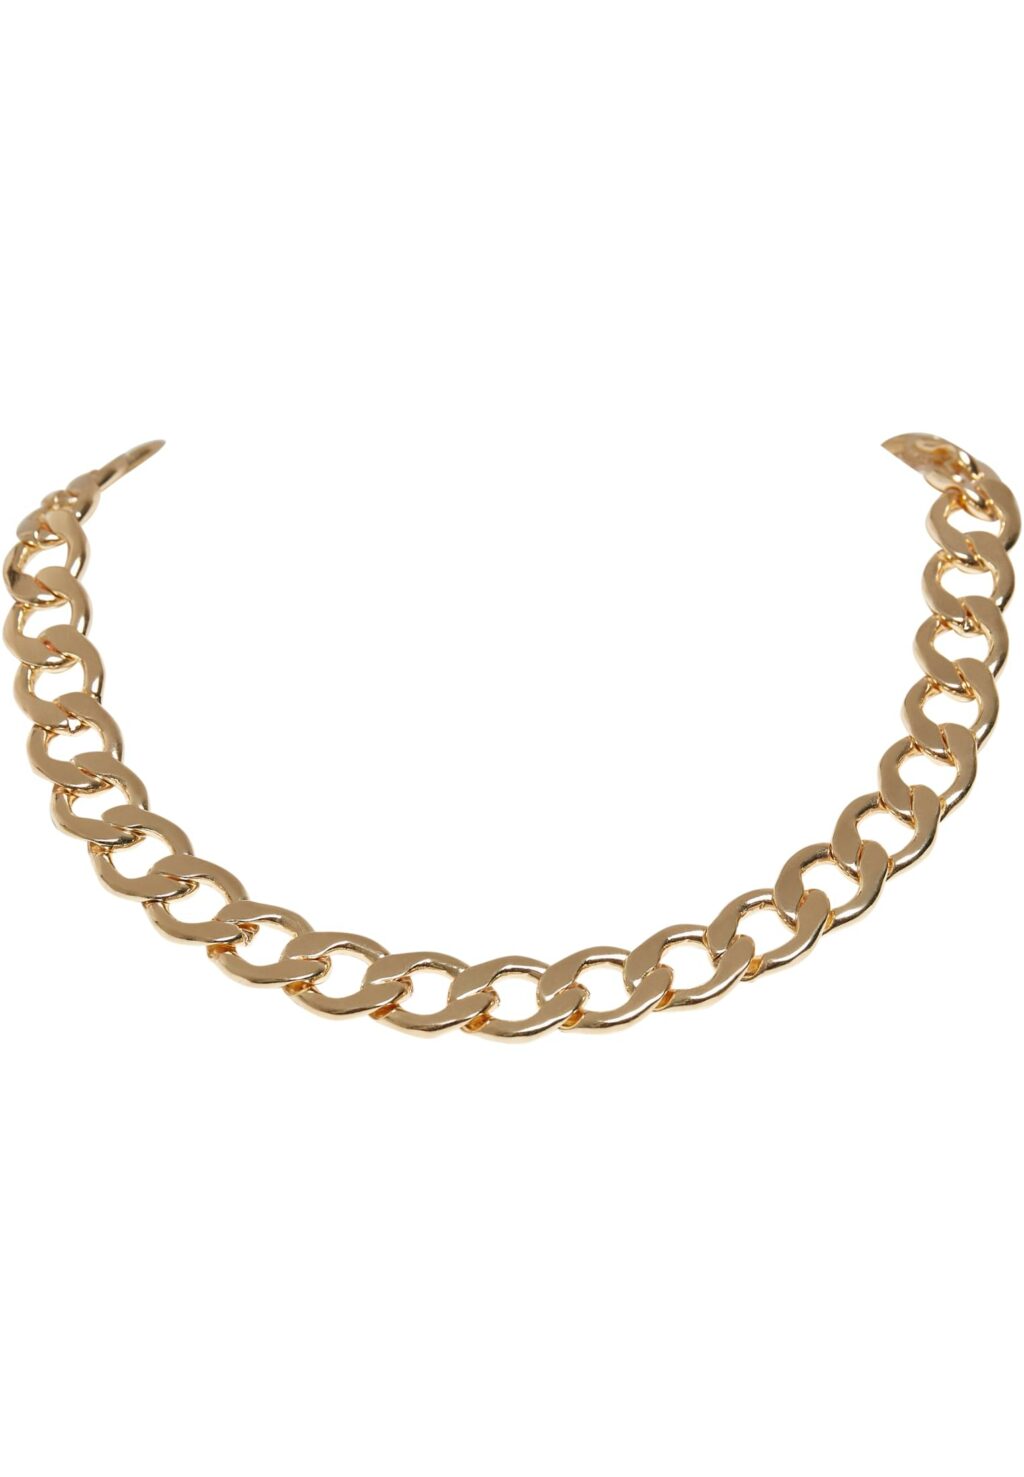 Big Chain Necklace gold one TB3891